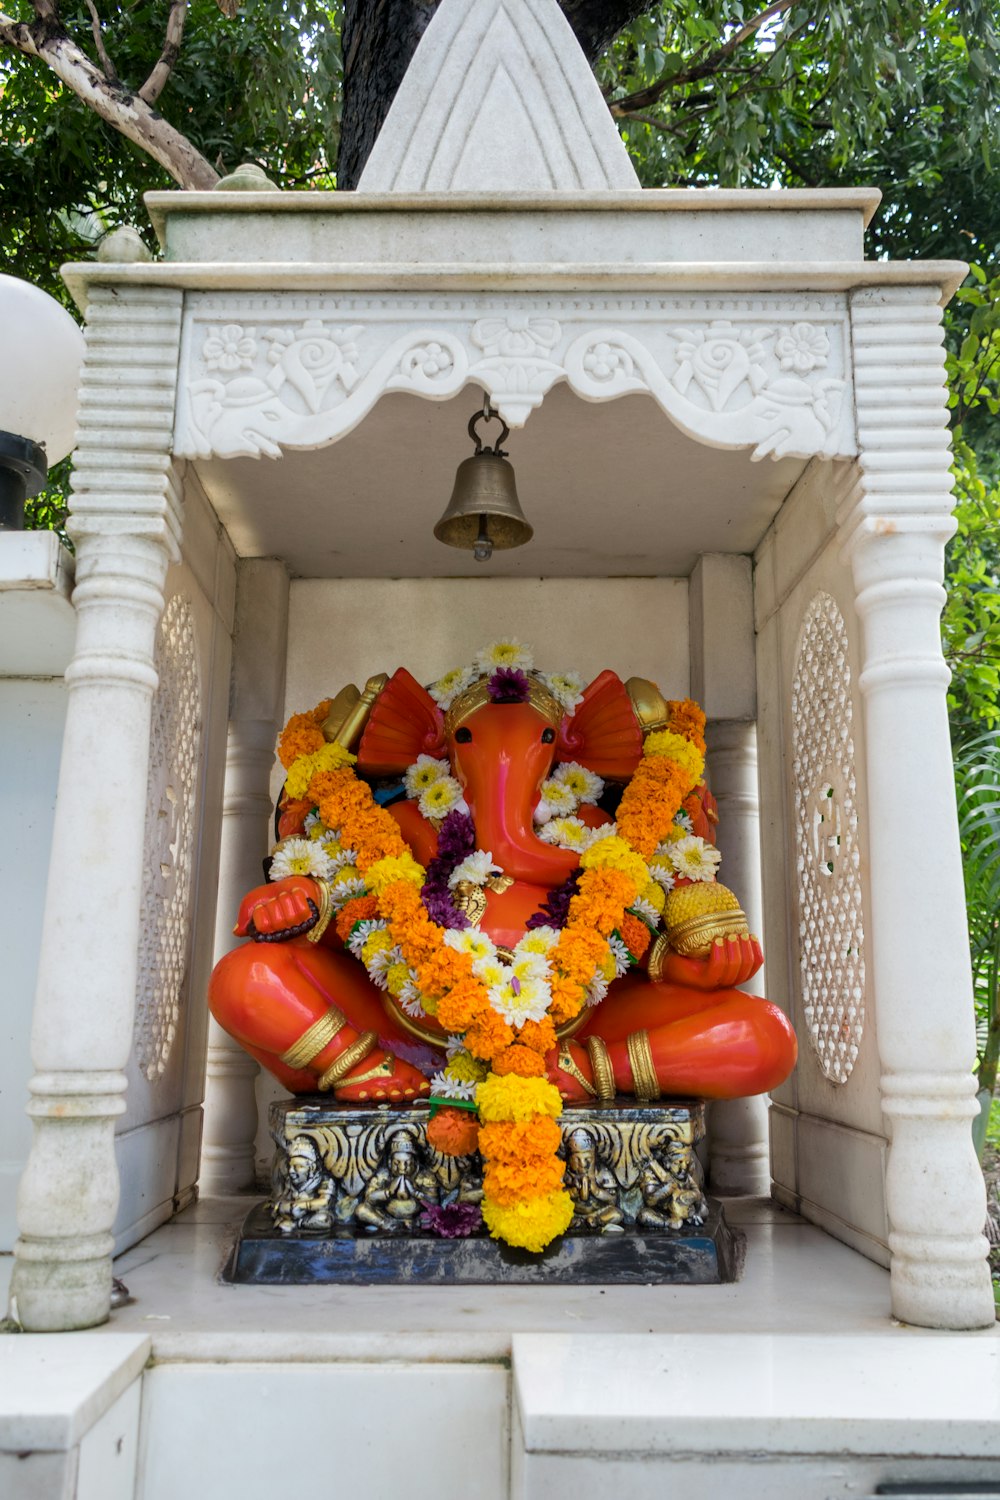 a statue of a ganesh in a shrine